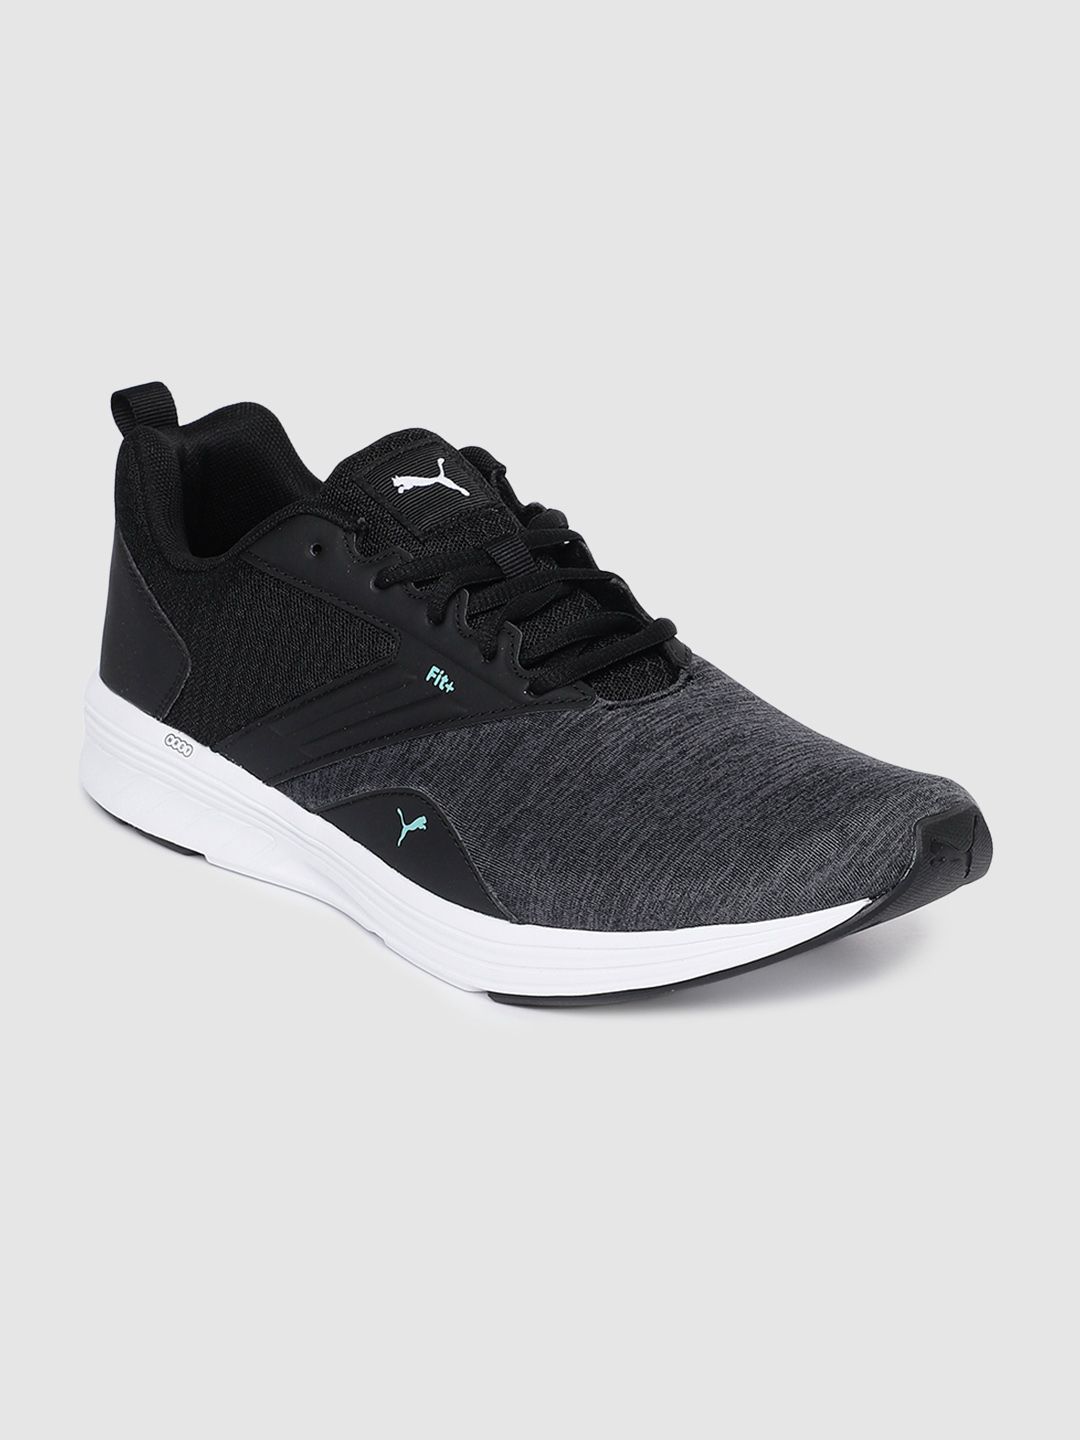 Puma Unisex Black Nrgy Comet SoftFoam+ Running Shoes Price in India